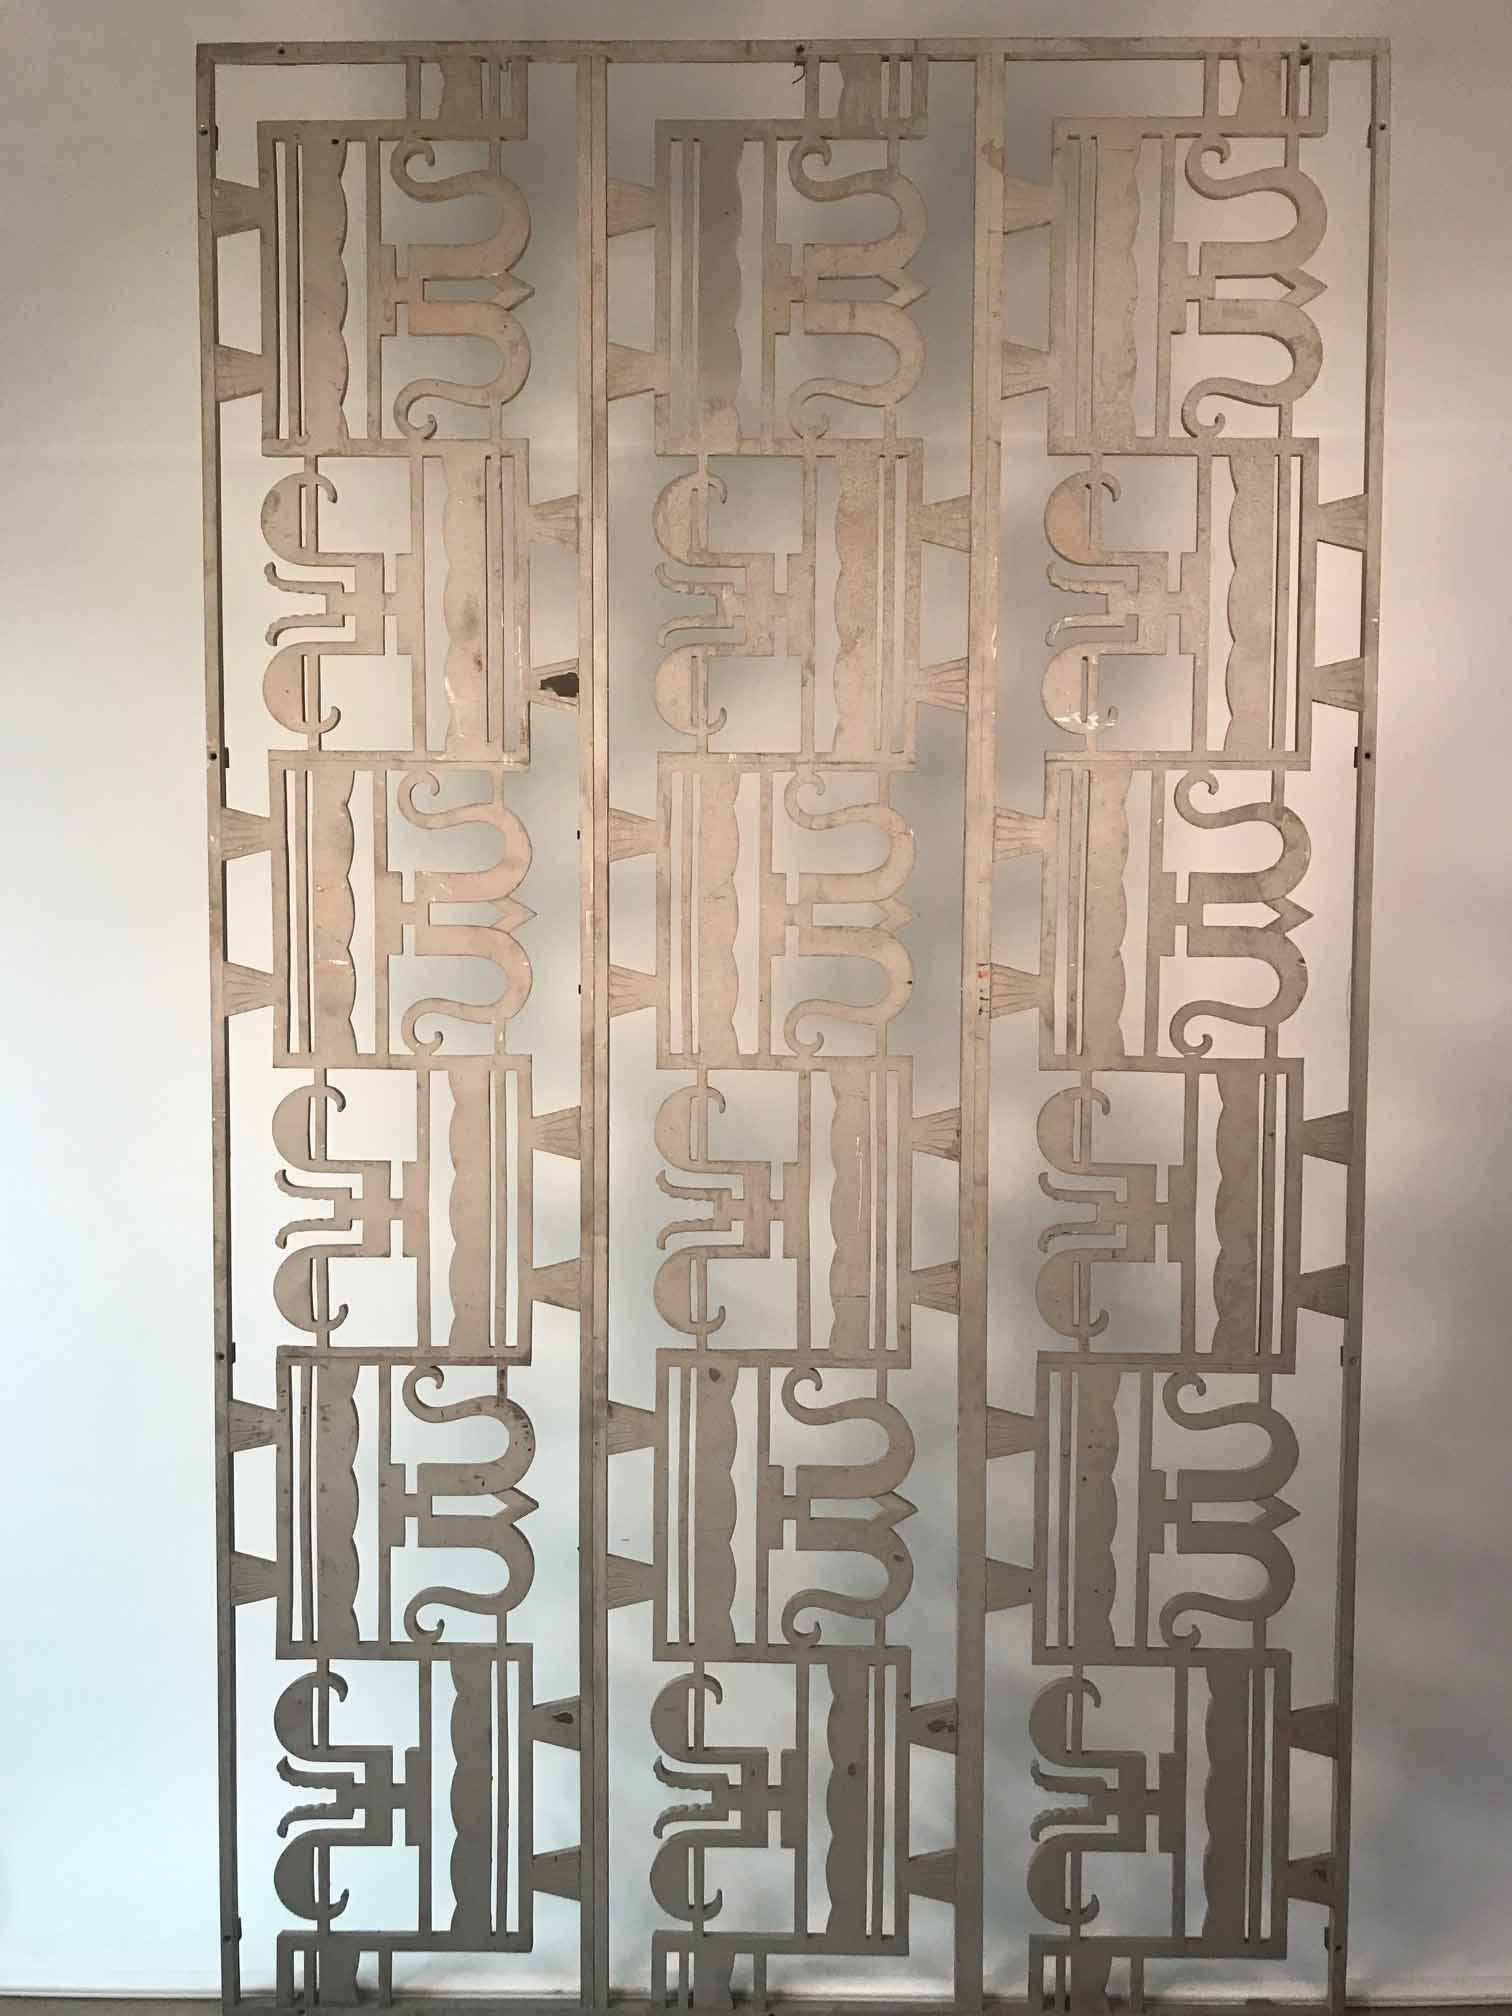 This was acquired in New York City, we believe it to be American and custom made for a wealthy client. The panels are cast with a stylised curving motif in an alternating pattern. This is an architectural element from the period and could now be